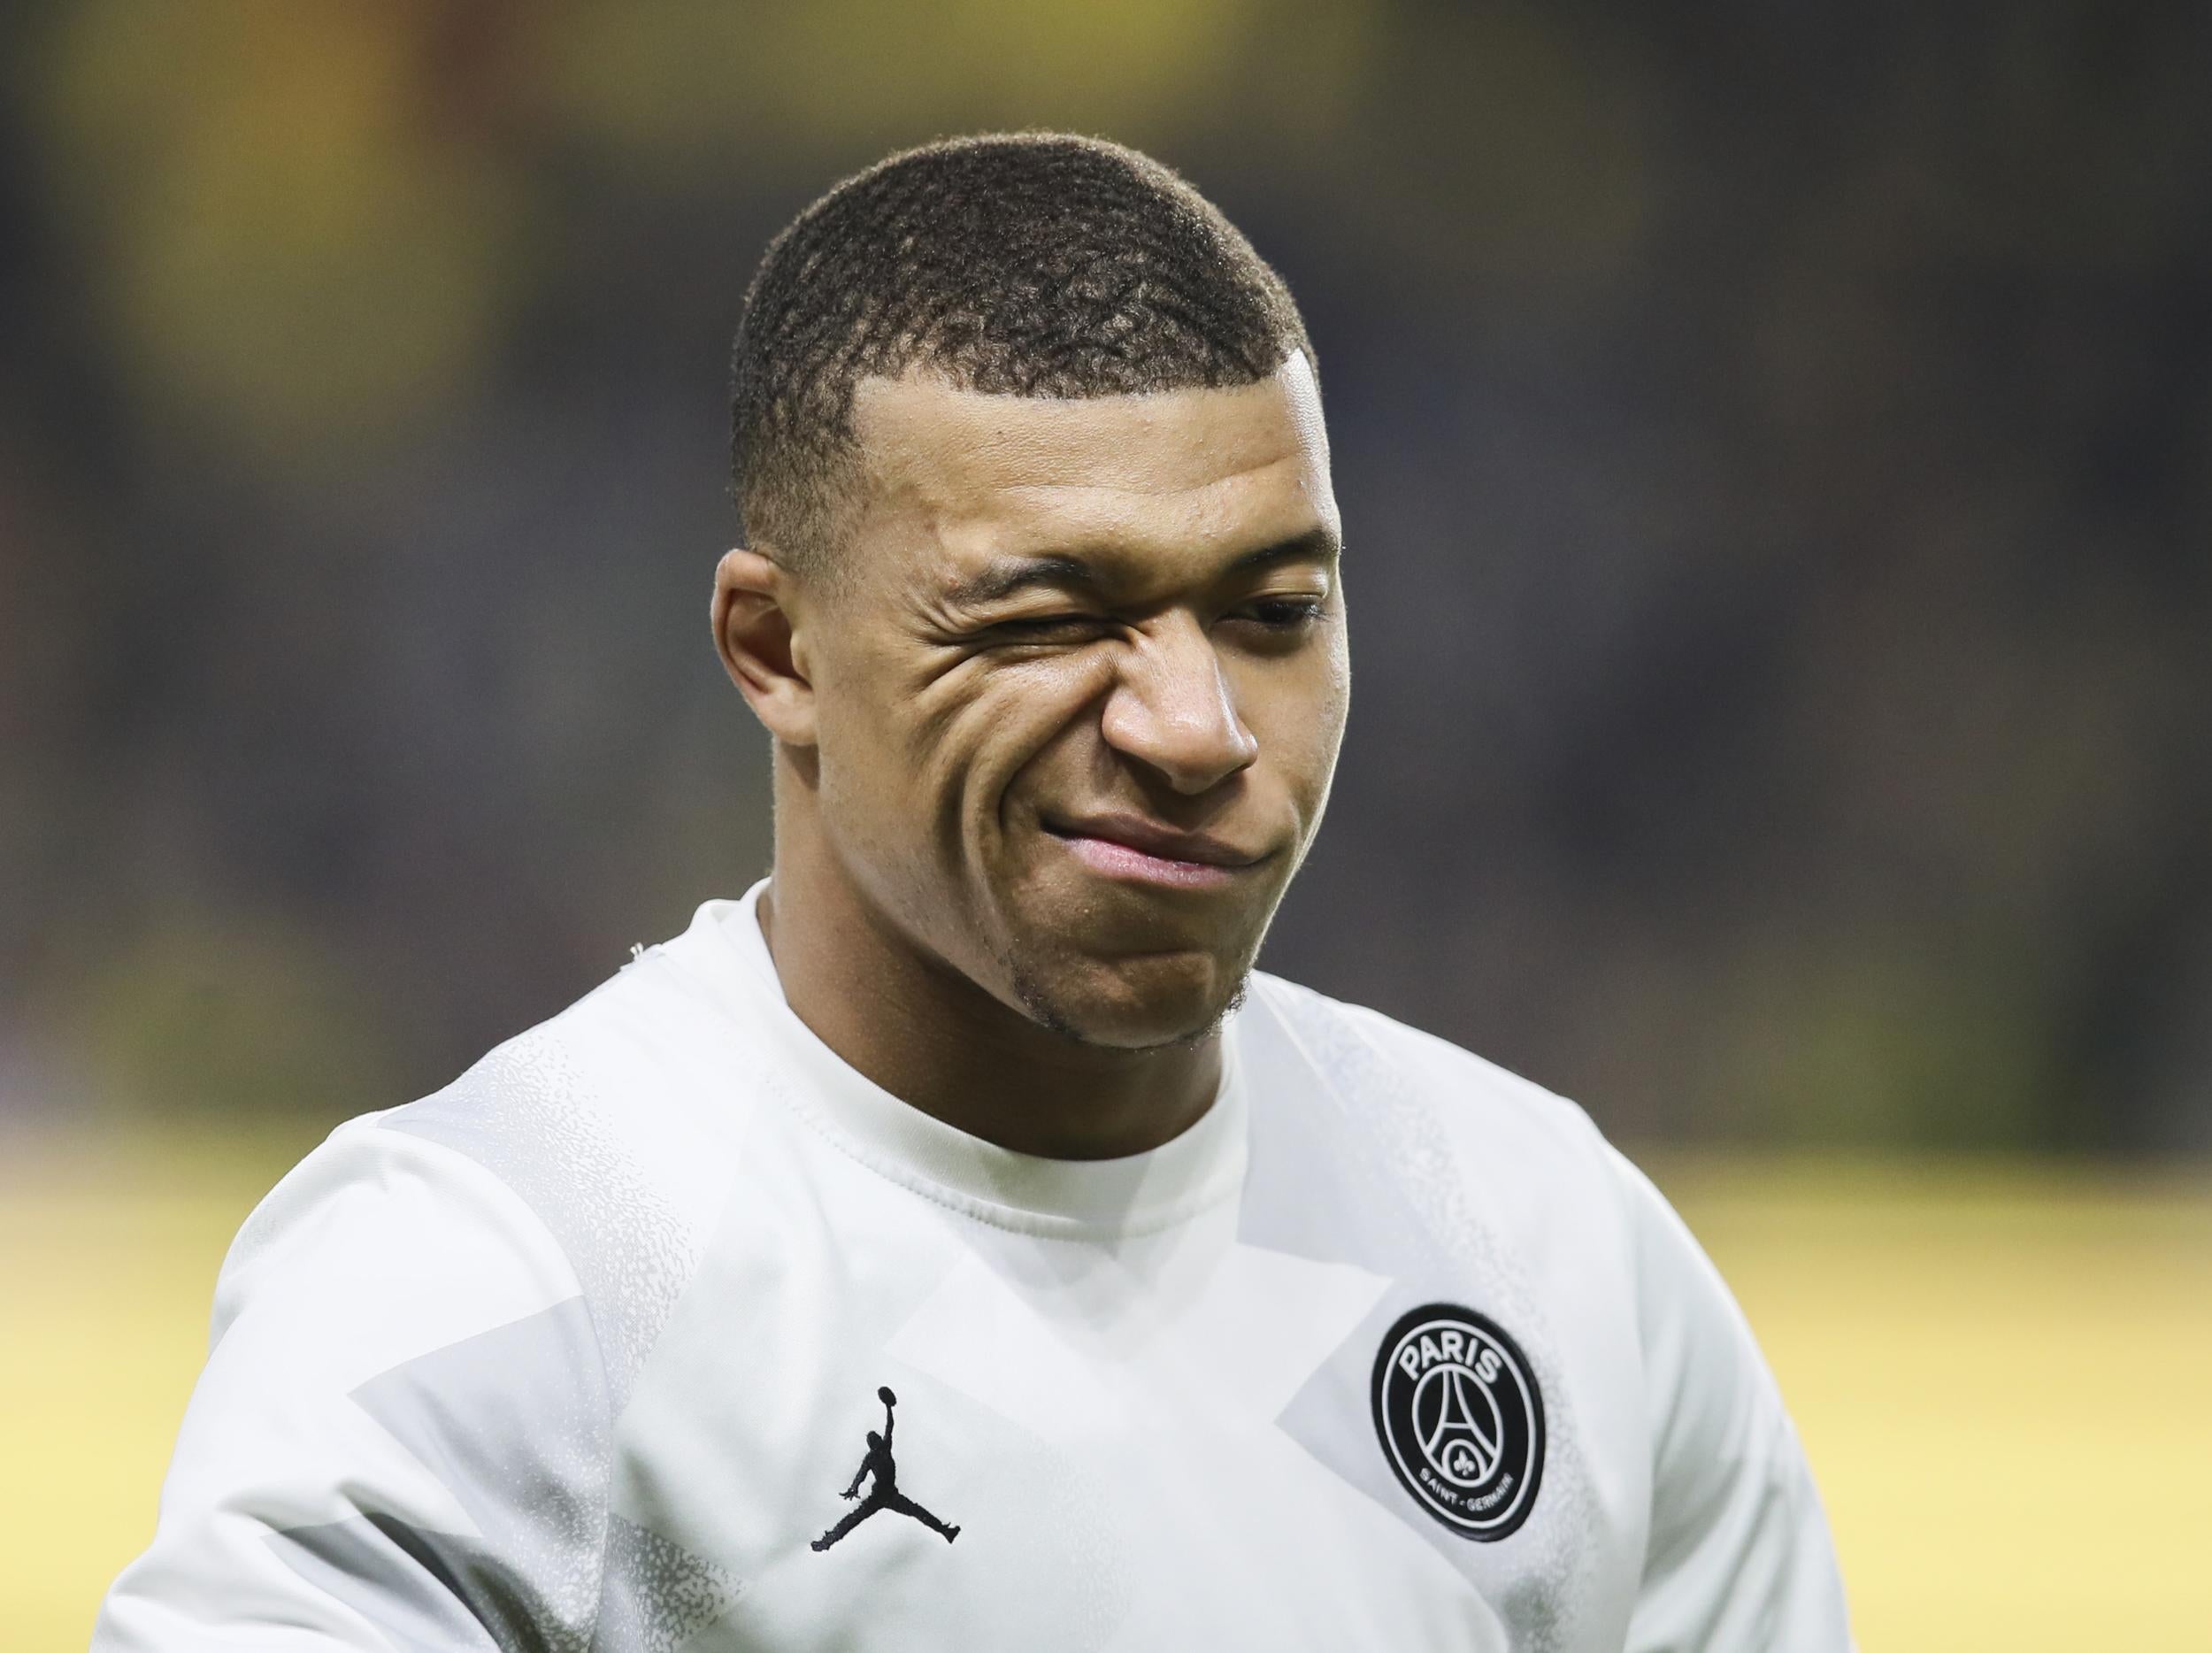 Mbappe has been praised by Ronaldo